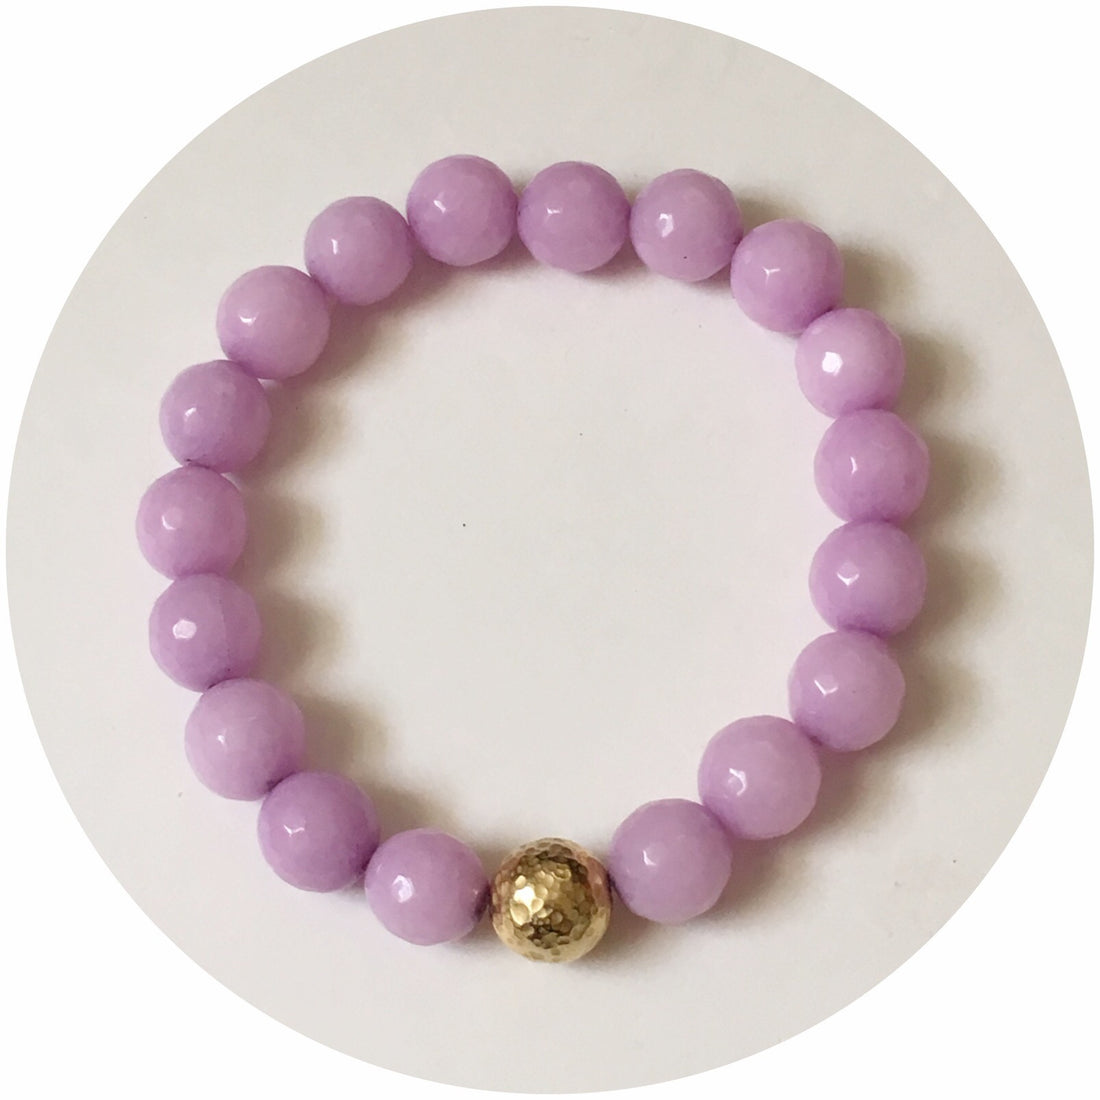 Lavender Jade with Hammered Gold Accent - Oriana Lamarca LLC